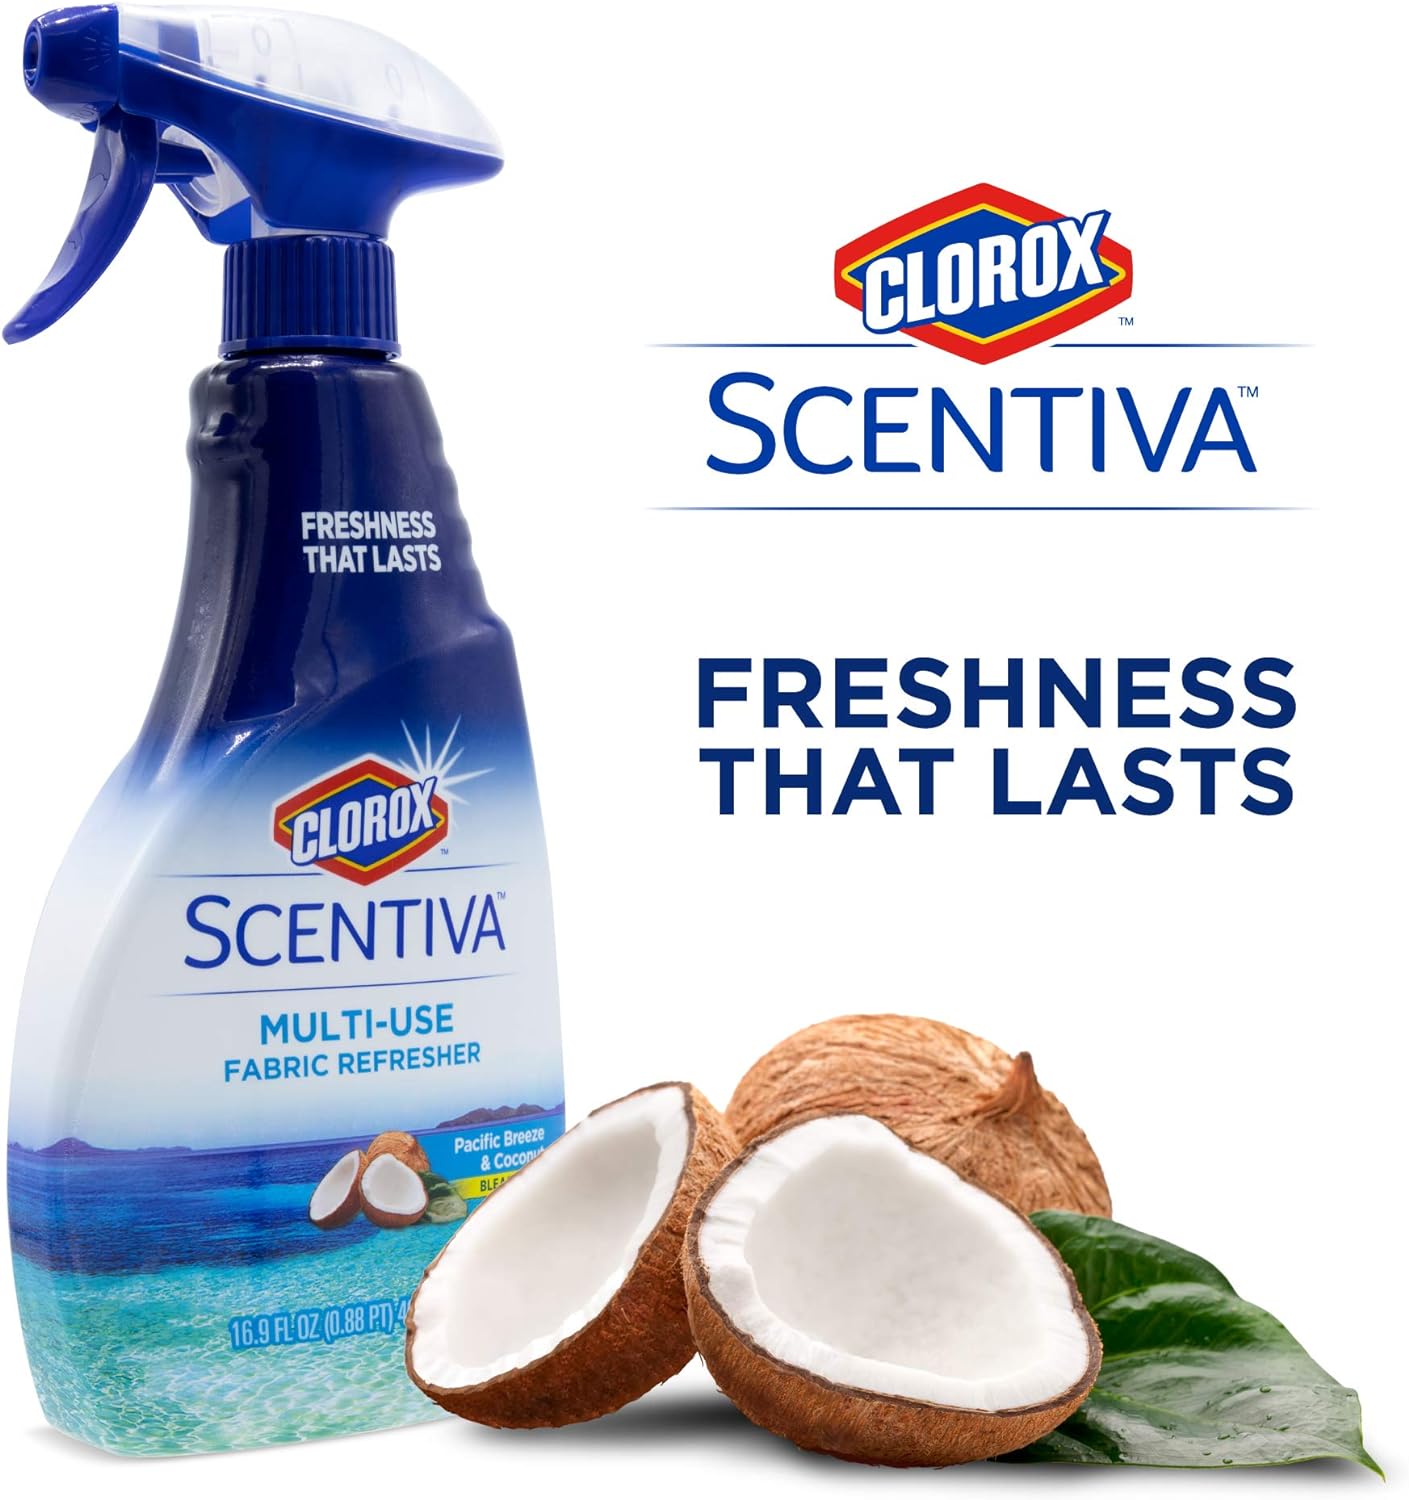 Clorox Scentiva Multi-Use Fabric Refresher Spray | Fabric Freshener for Closets, Upholstery, Curtains, and Carpets | Pacific Breeze & Coconut | 16.9 Ounces